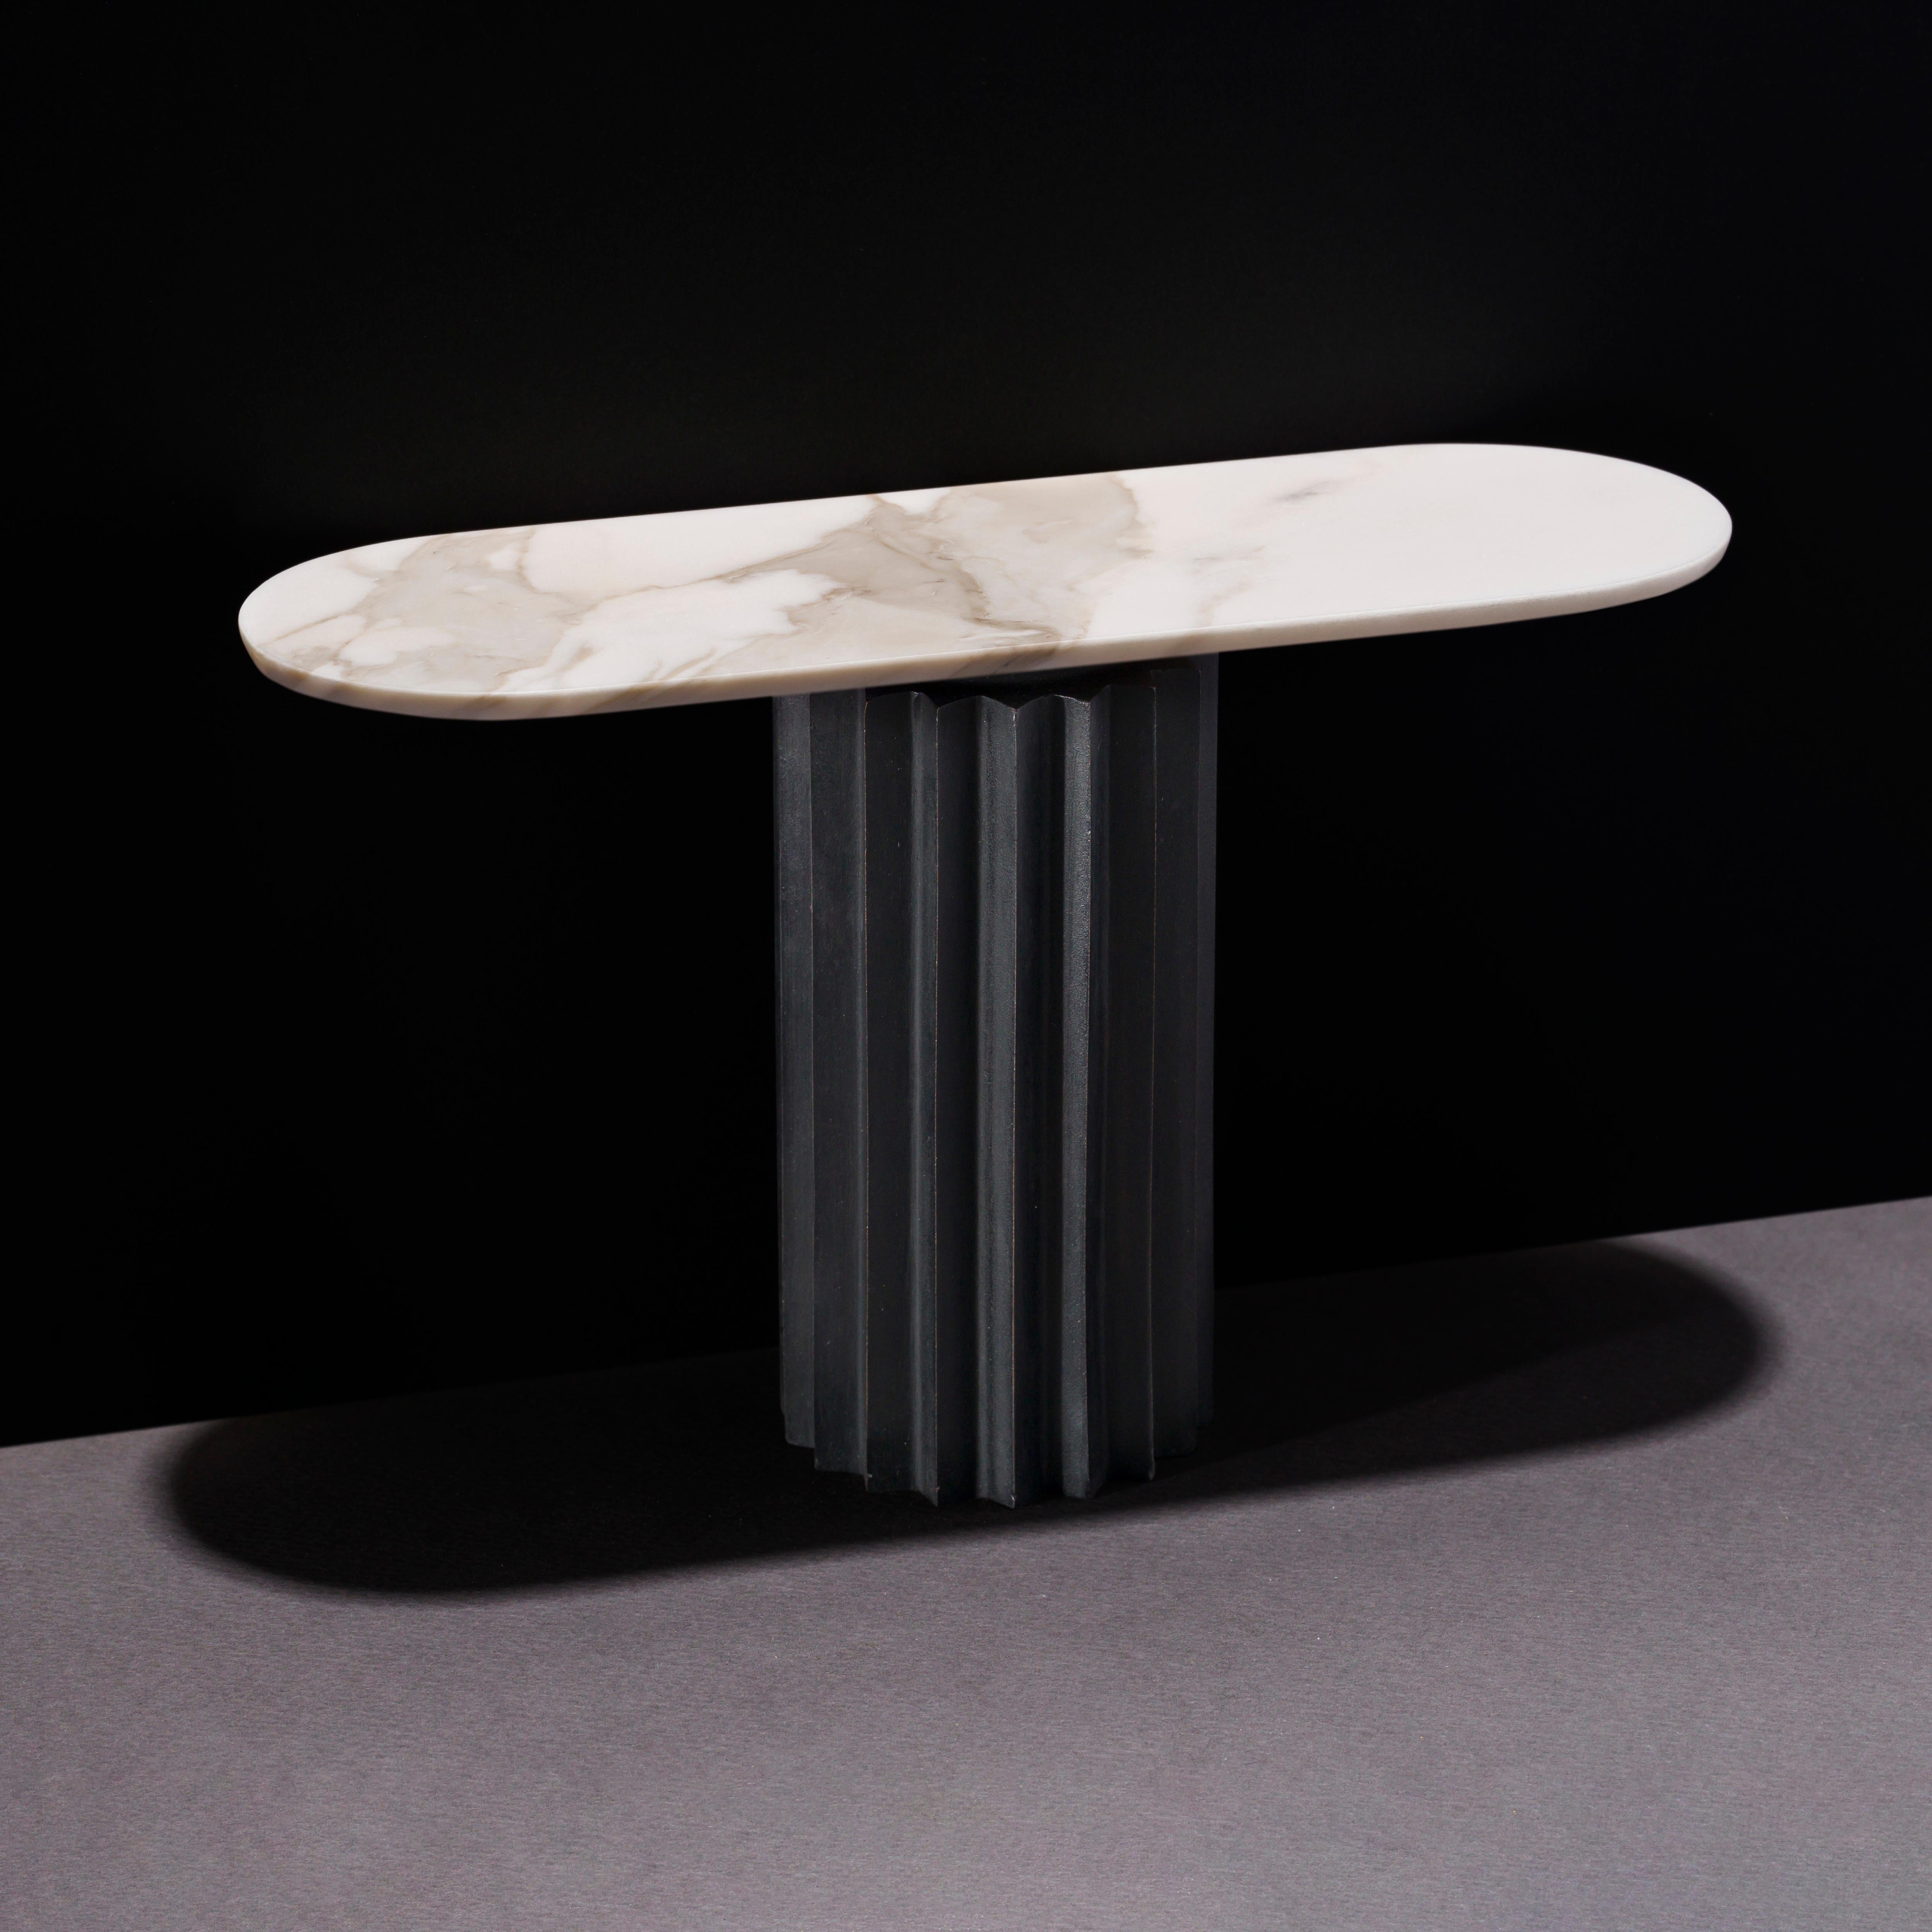 Dining tables with marble tops and multifaceted pedestals in cast bronze, blackened bronze or aluminum. 

Inspired by Doric columns in archaic architecture, the extruded multi-point star pedestals have a different finish on each vertical face: the